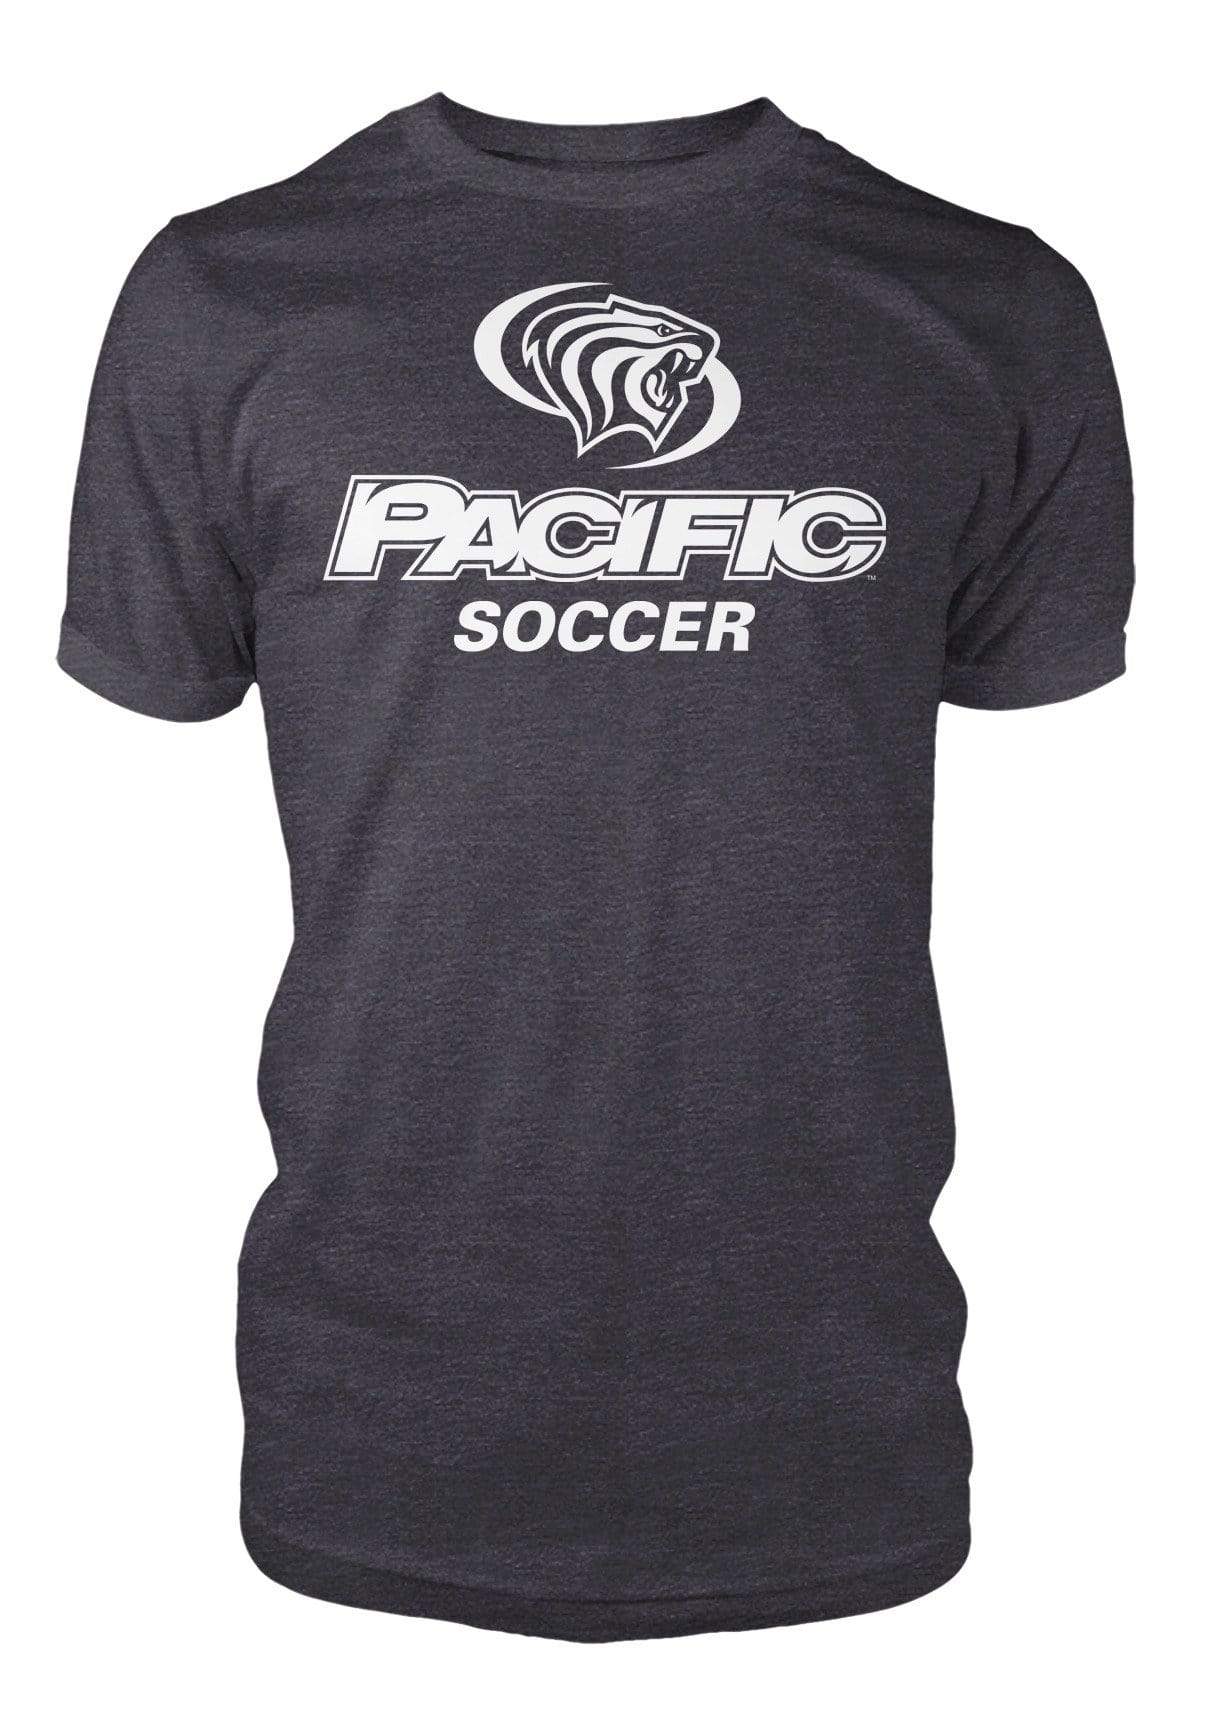 University of the Pacific Tigers Soccer Division I T-shirt by Zeus Collegiate